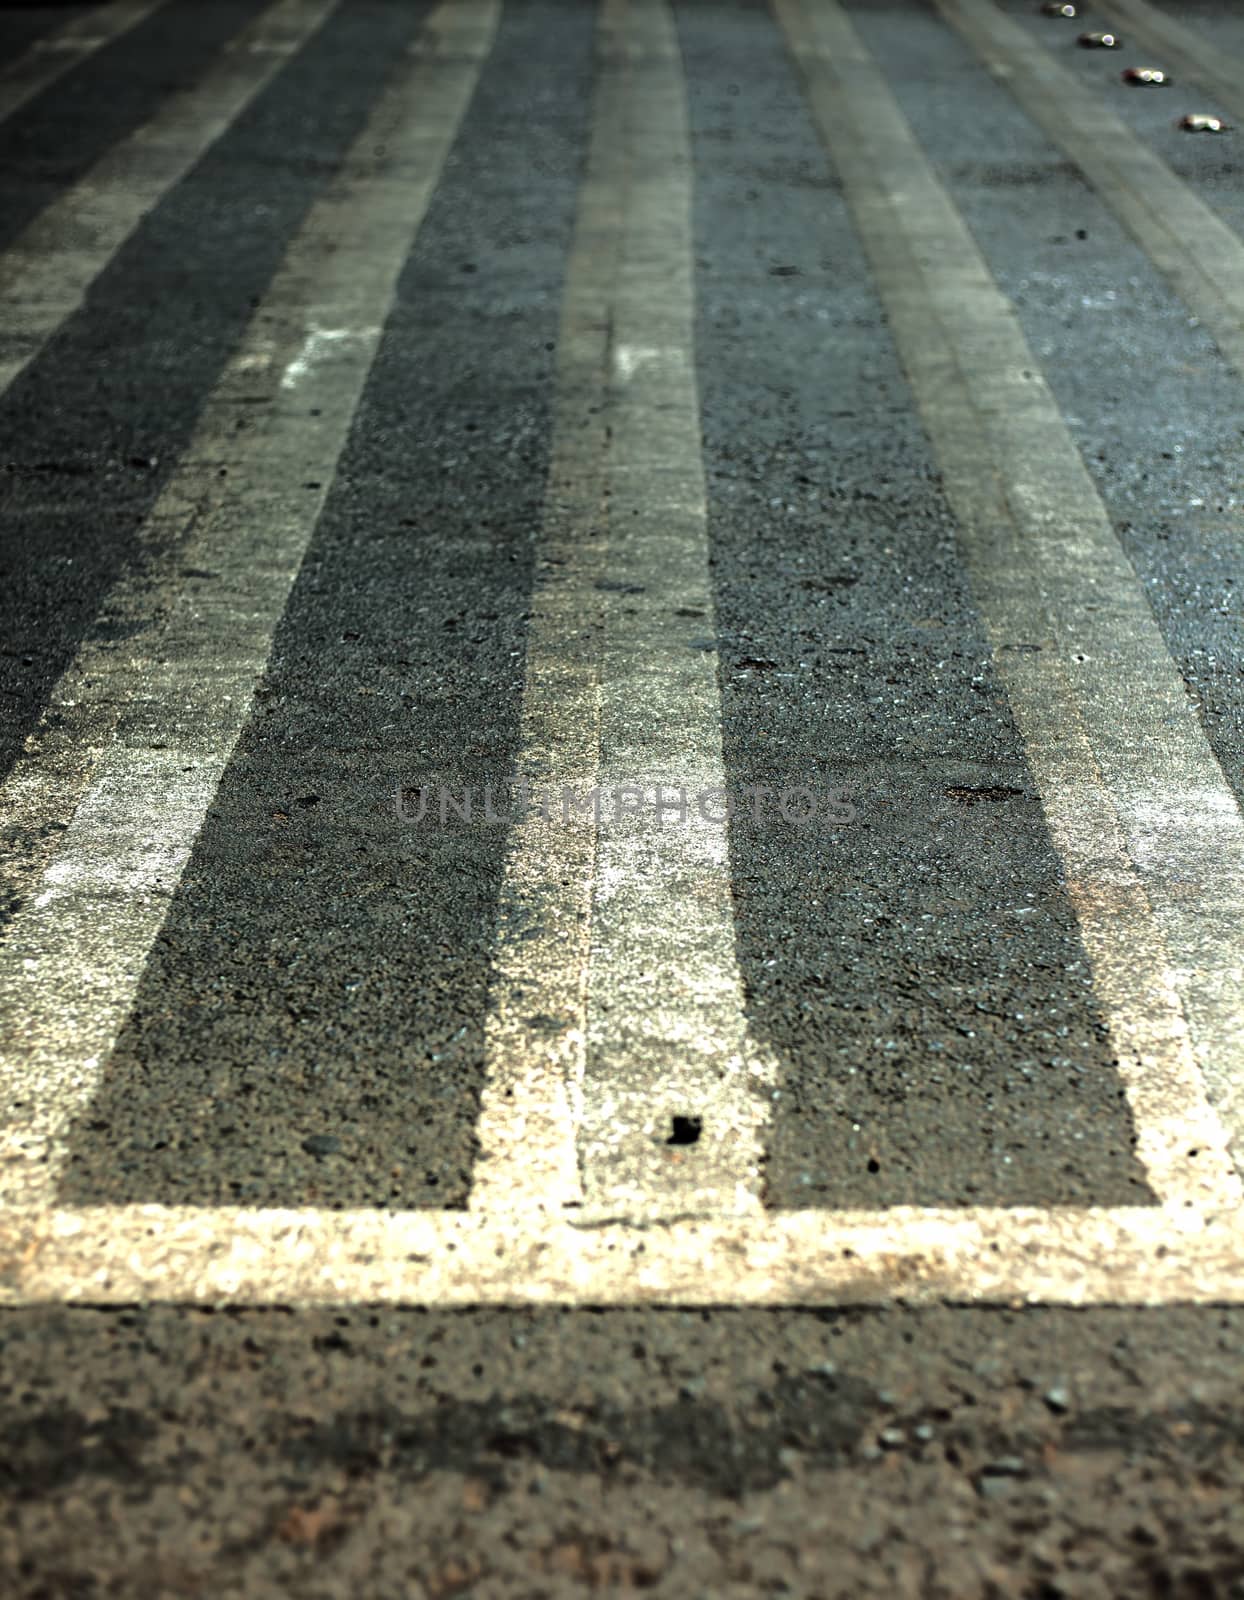 Extreme close up shot of cross walks or zebra crossing on roads.